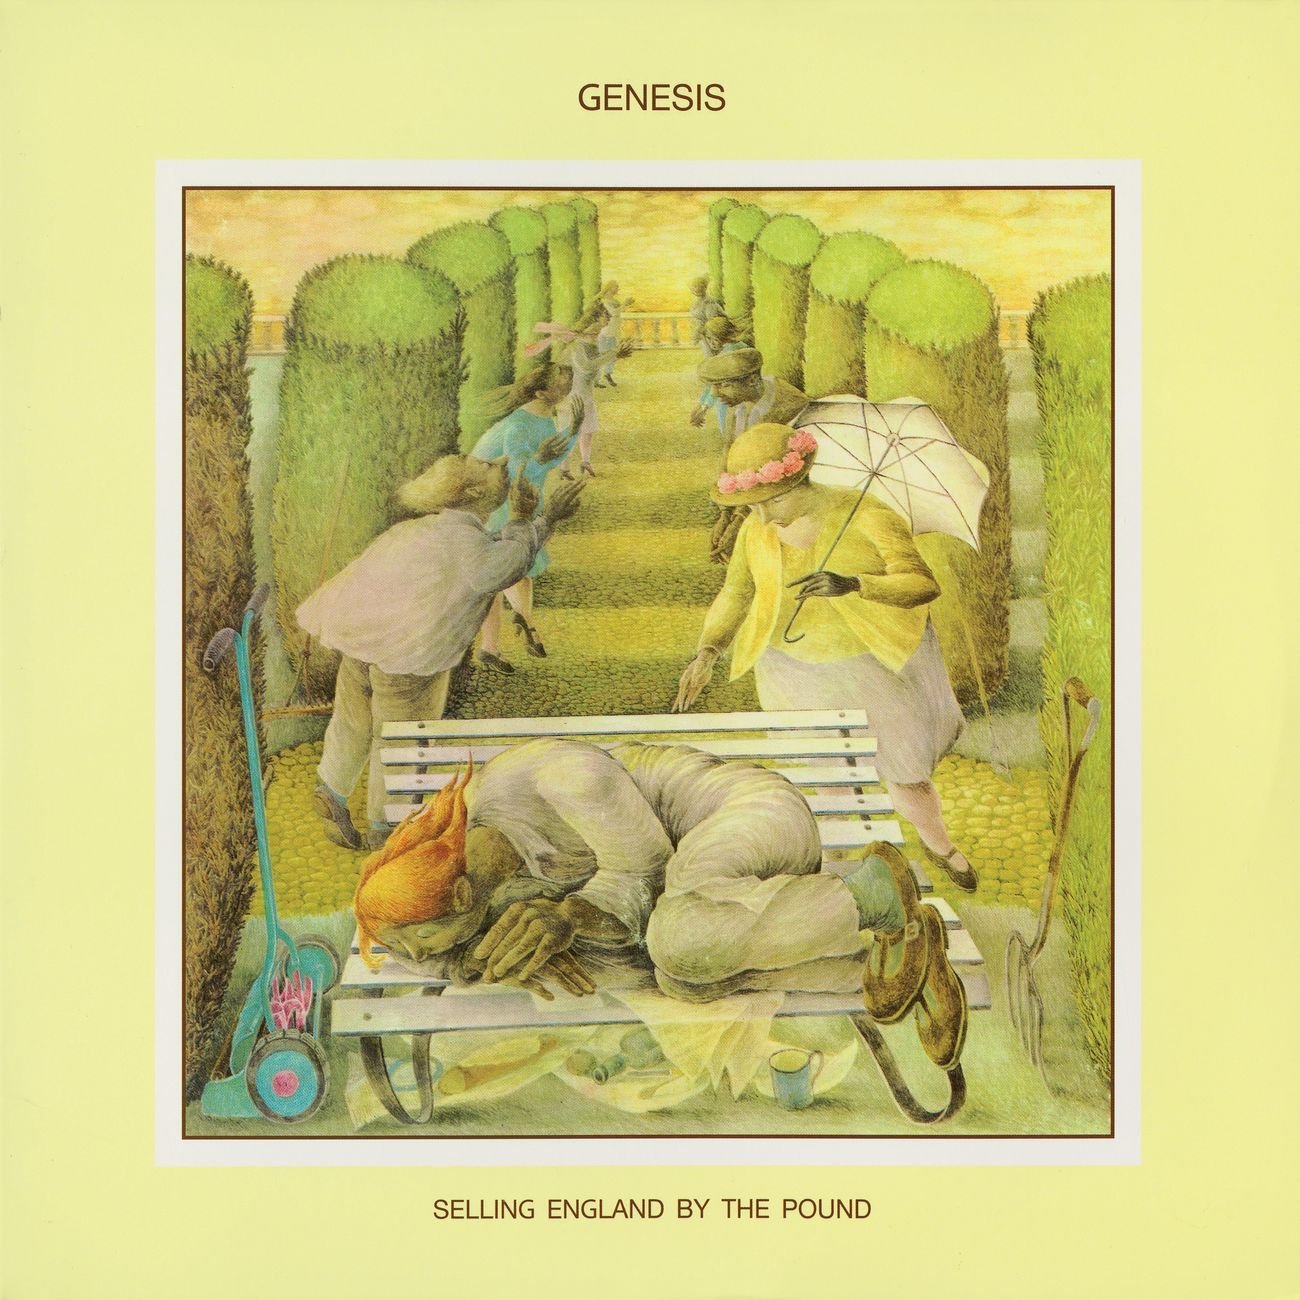 Genesis: Selling England By The Pound (Charisma 1973).